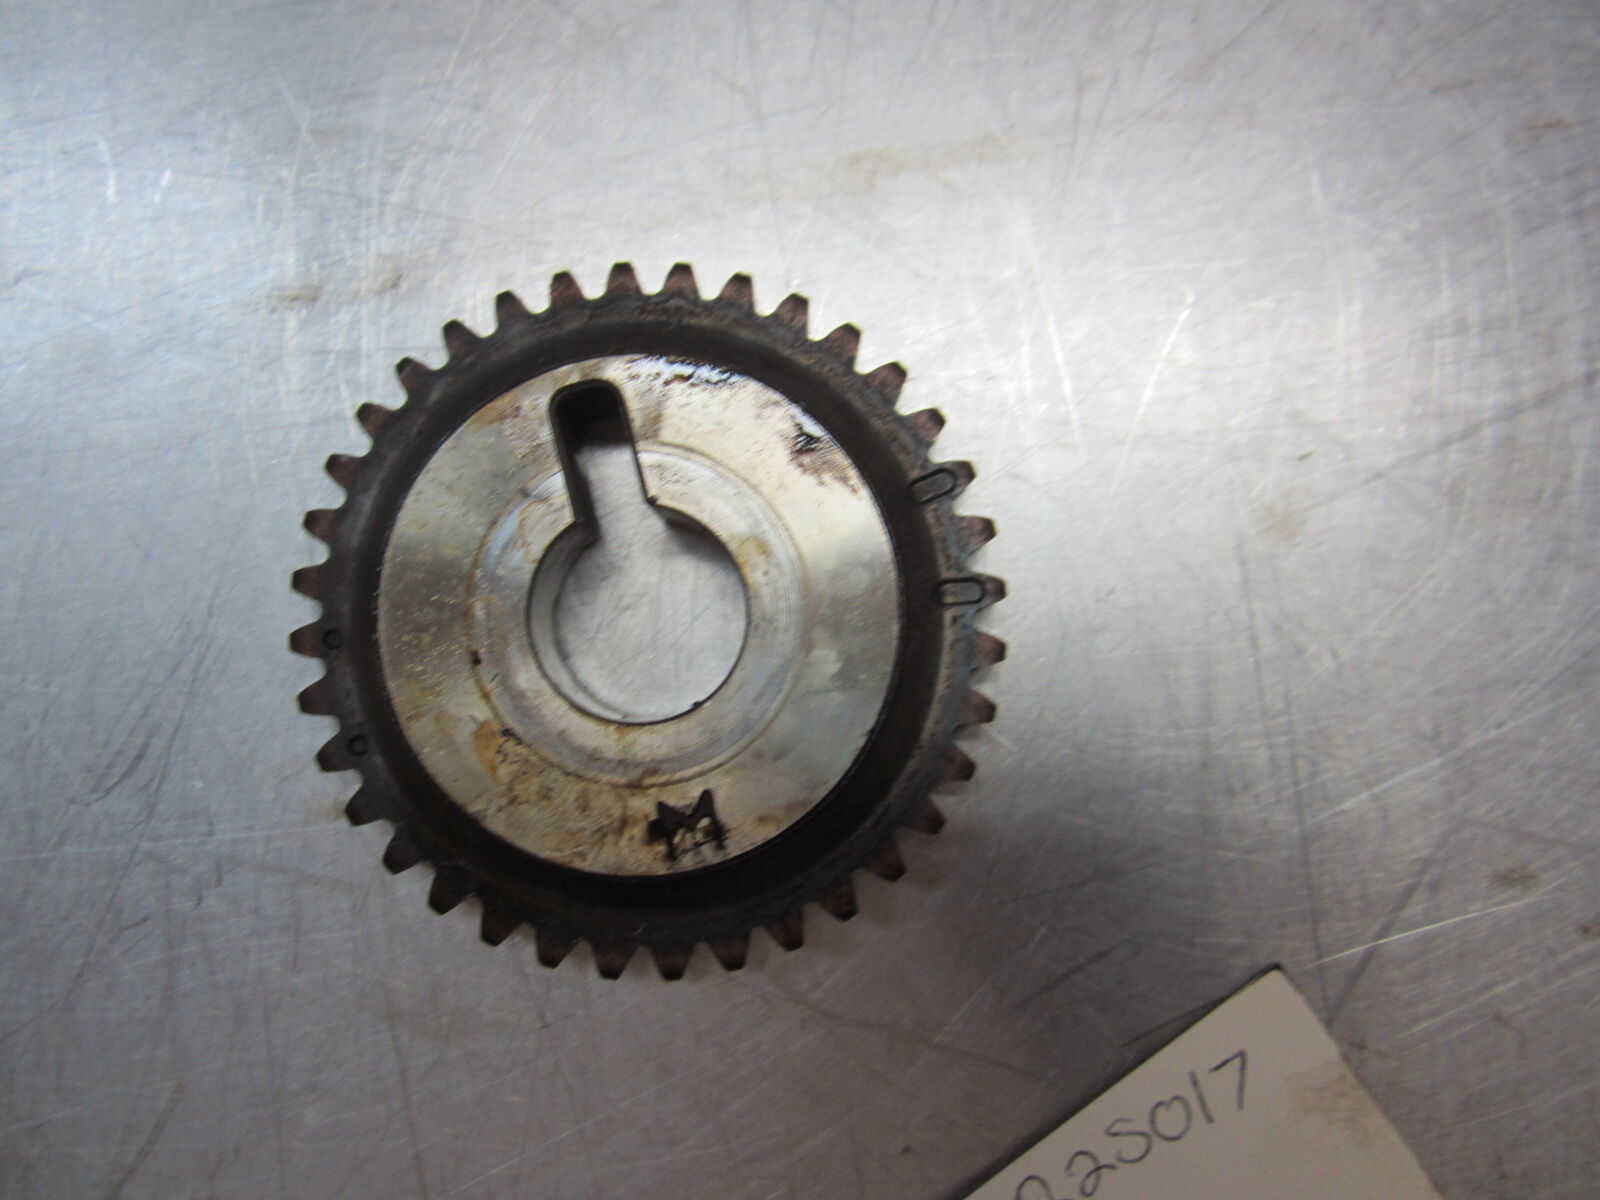 Exhaust Camshaft Timing Gear From 2007 Infiniti G35 Coupe 3.5 - $40.00